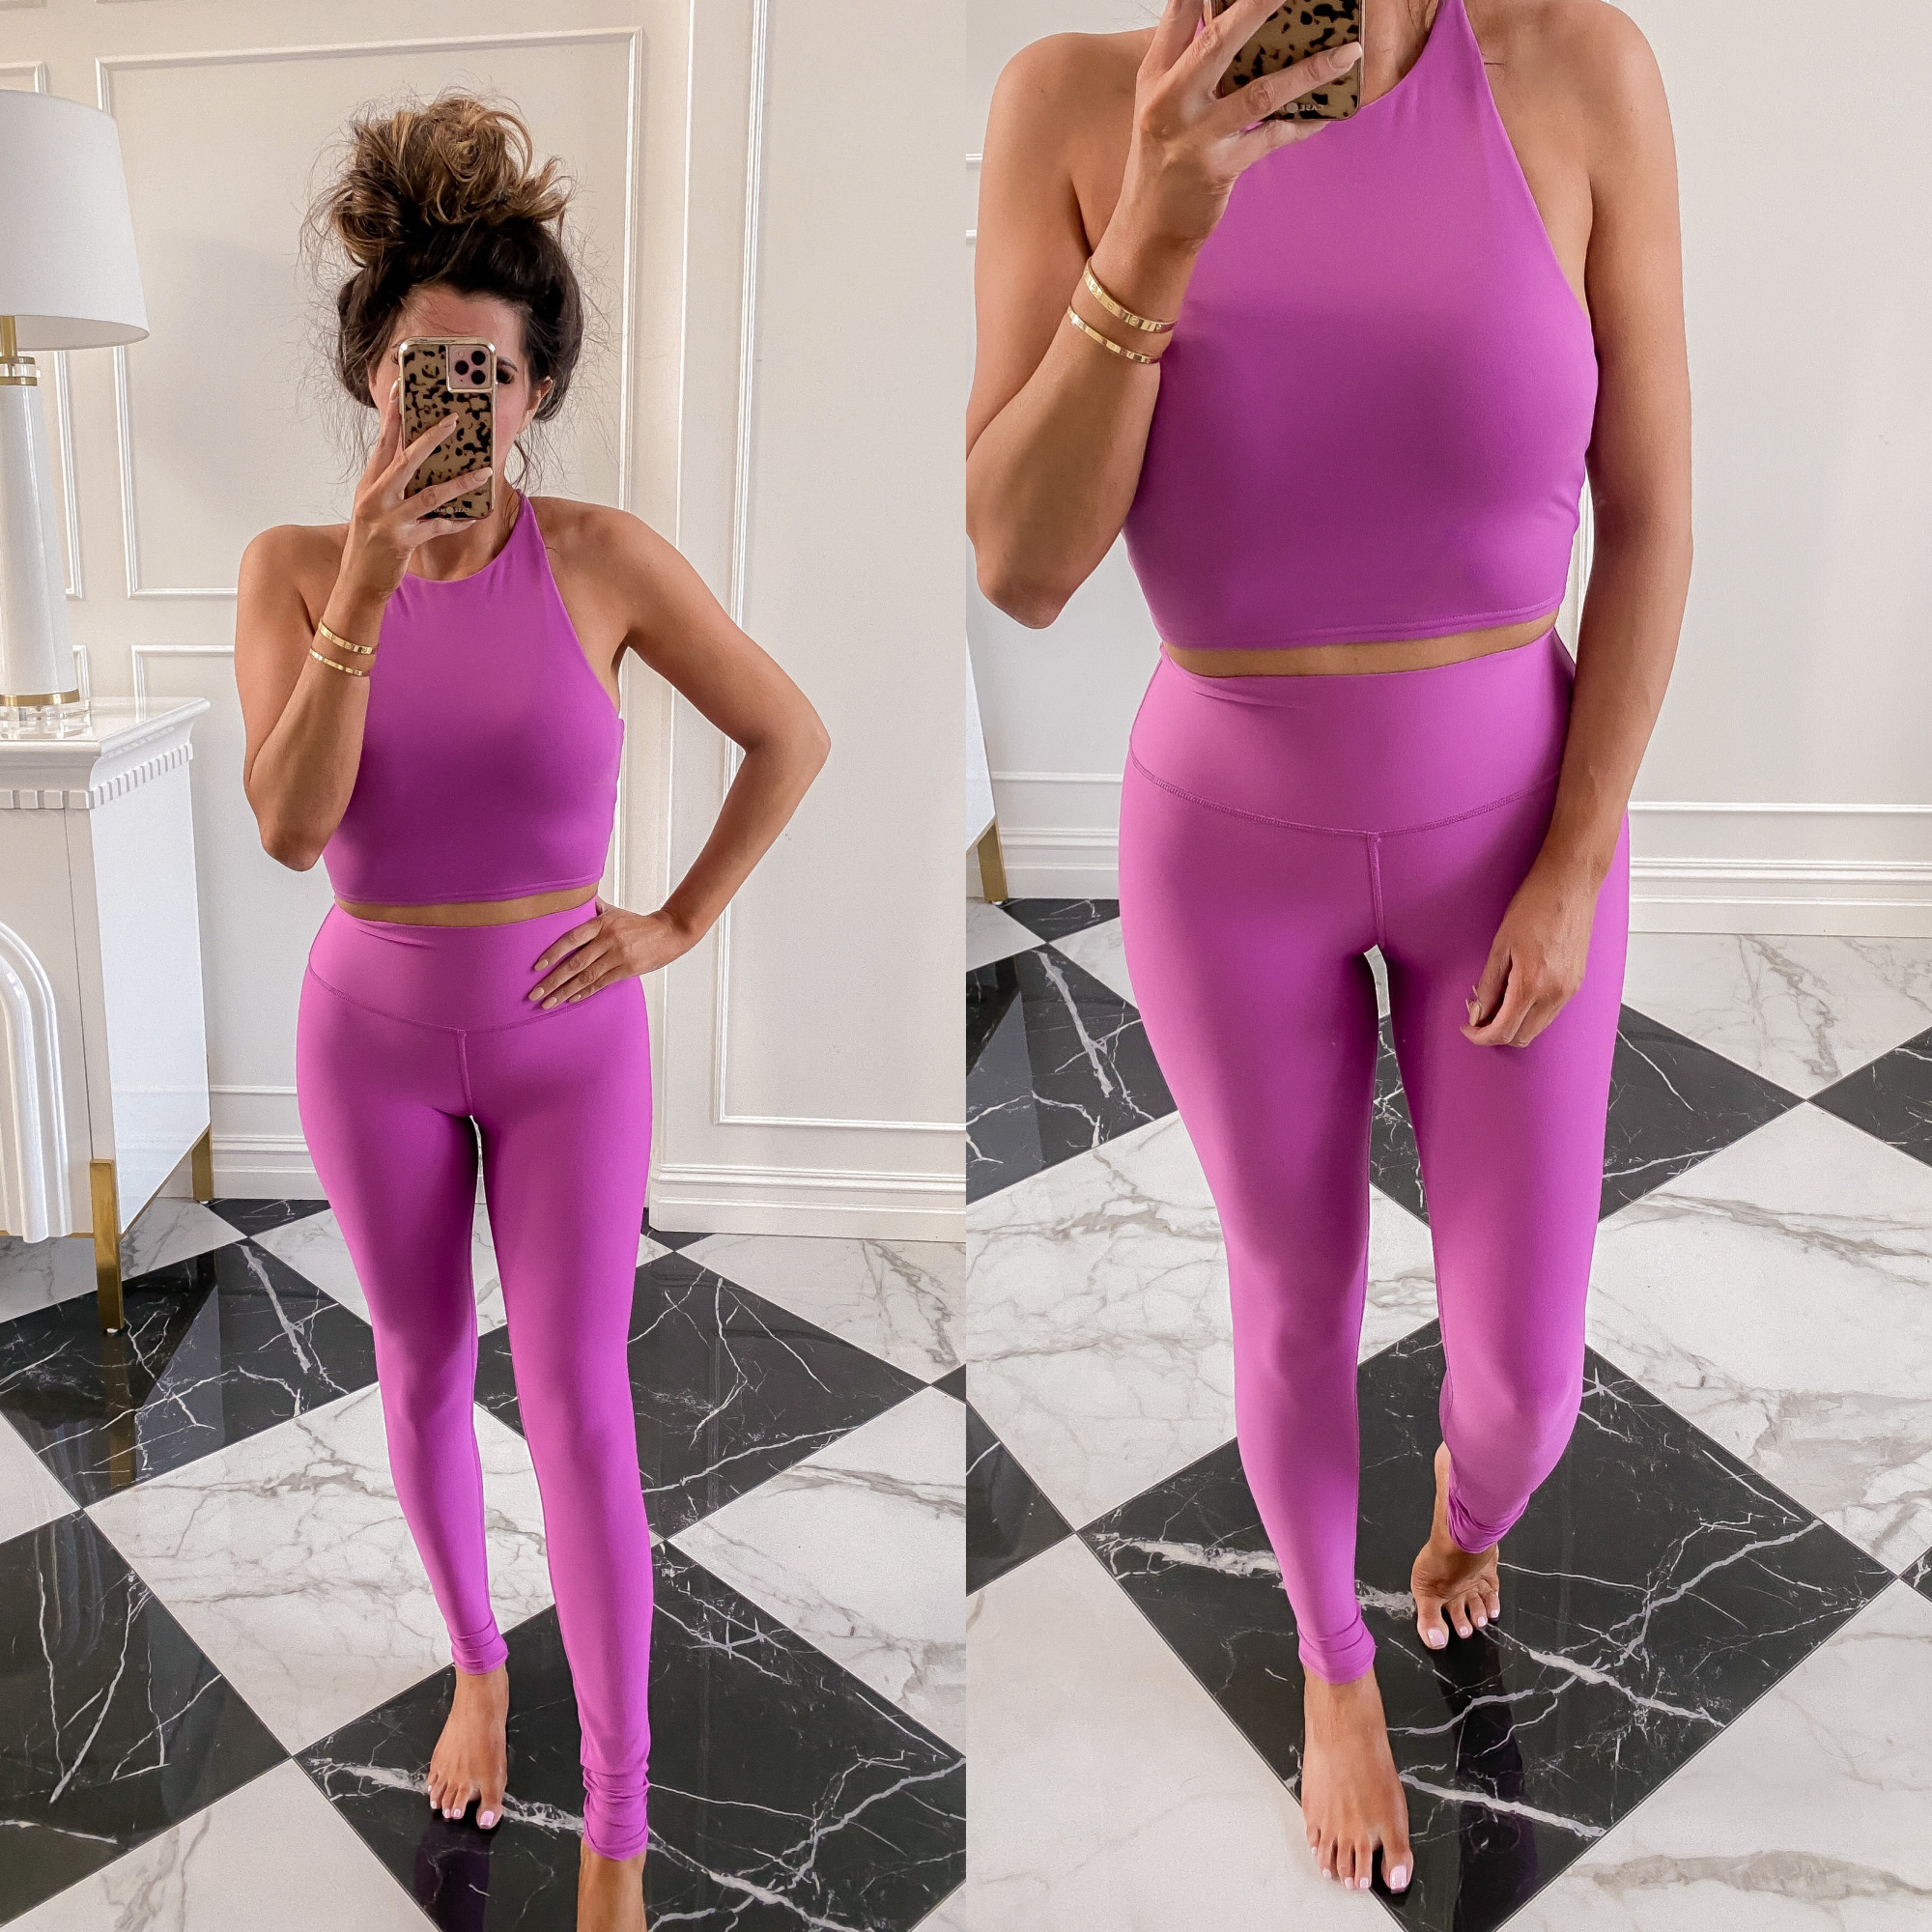 Nordstrom Anniversary Sale 2020 Try On, NSALE 2020 Alo yoga, fitness workout gear | Nordstrom Anniversary Sale by popular US fashion blog, The Sweetest Thing: image of Emily Gemma wearing ALO Movement Sports Bra and ALO Air Lift High Waist Leggings.